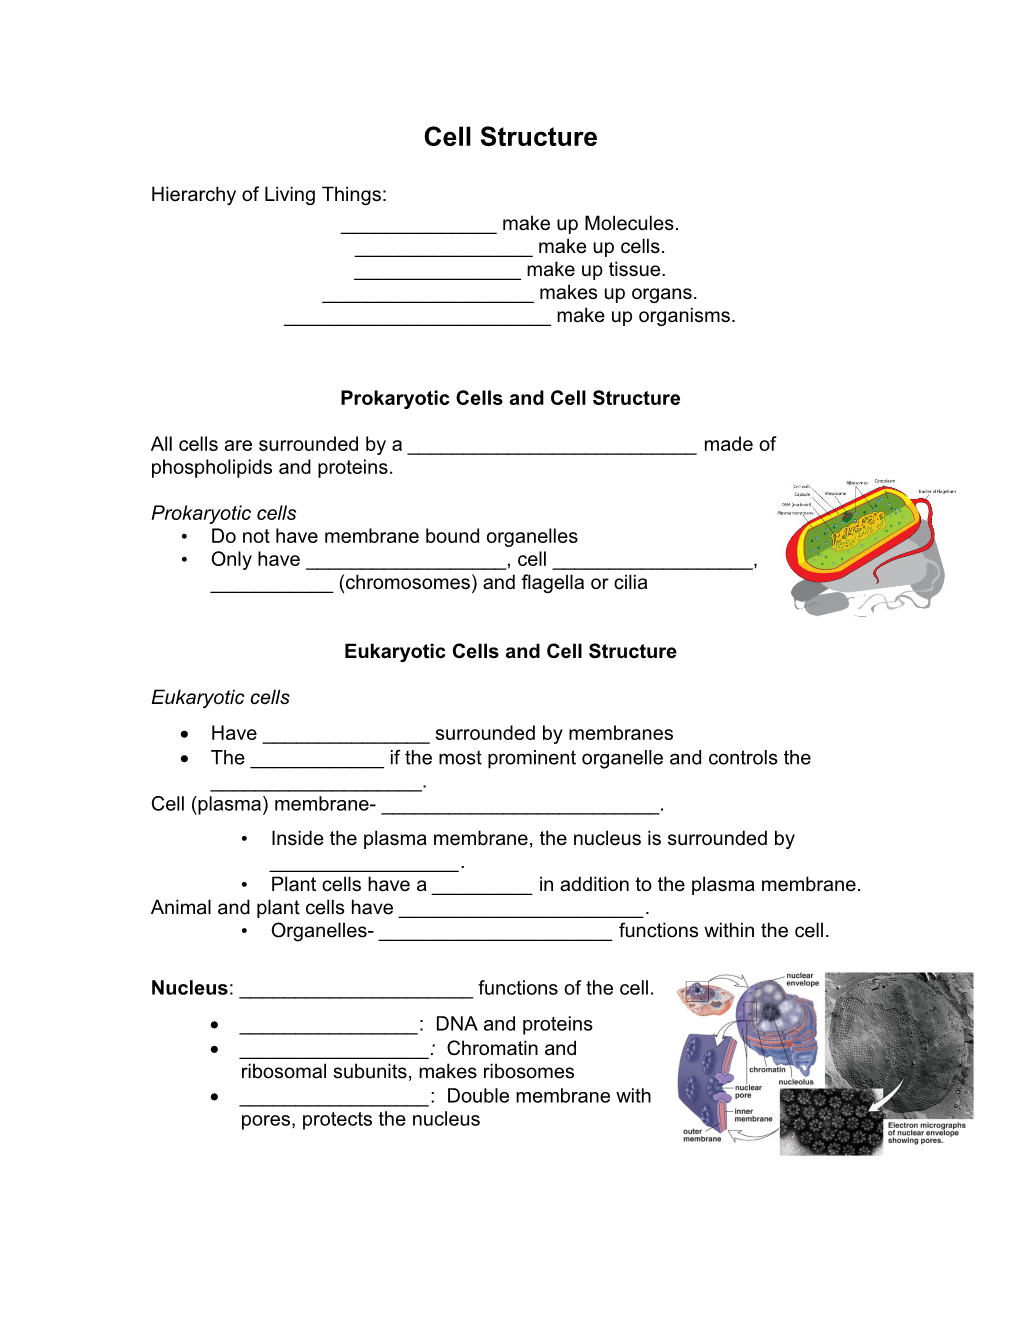 Eukaryotic Cells and Cell Structure